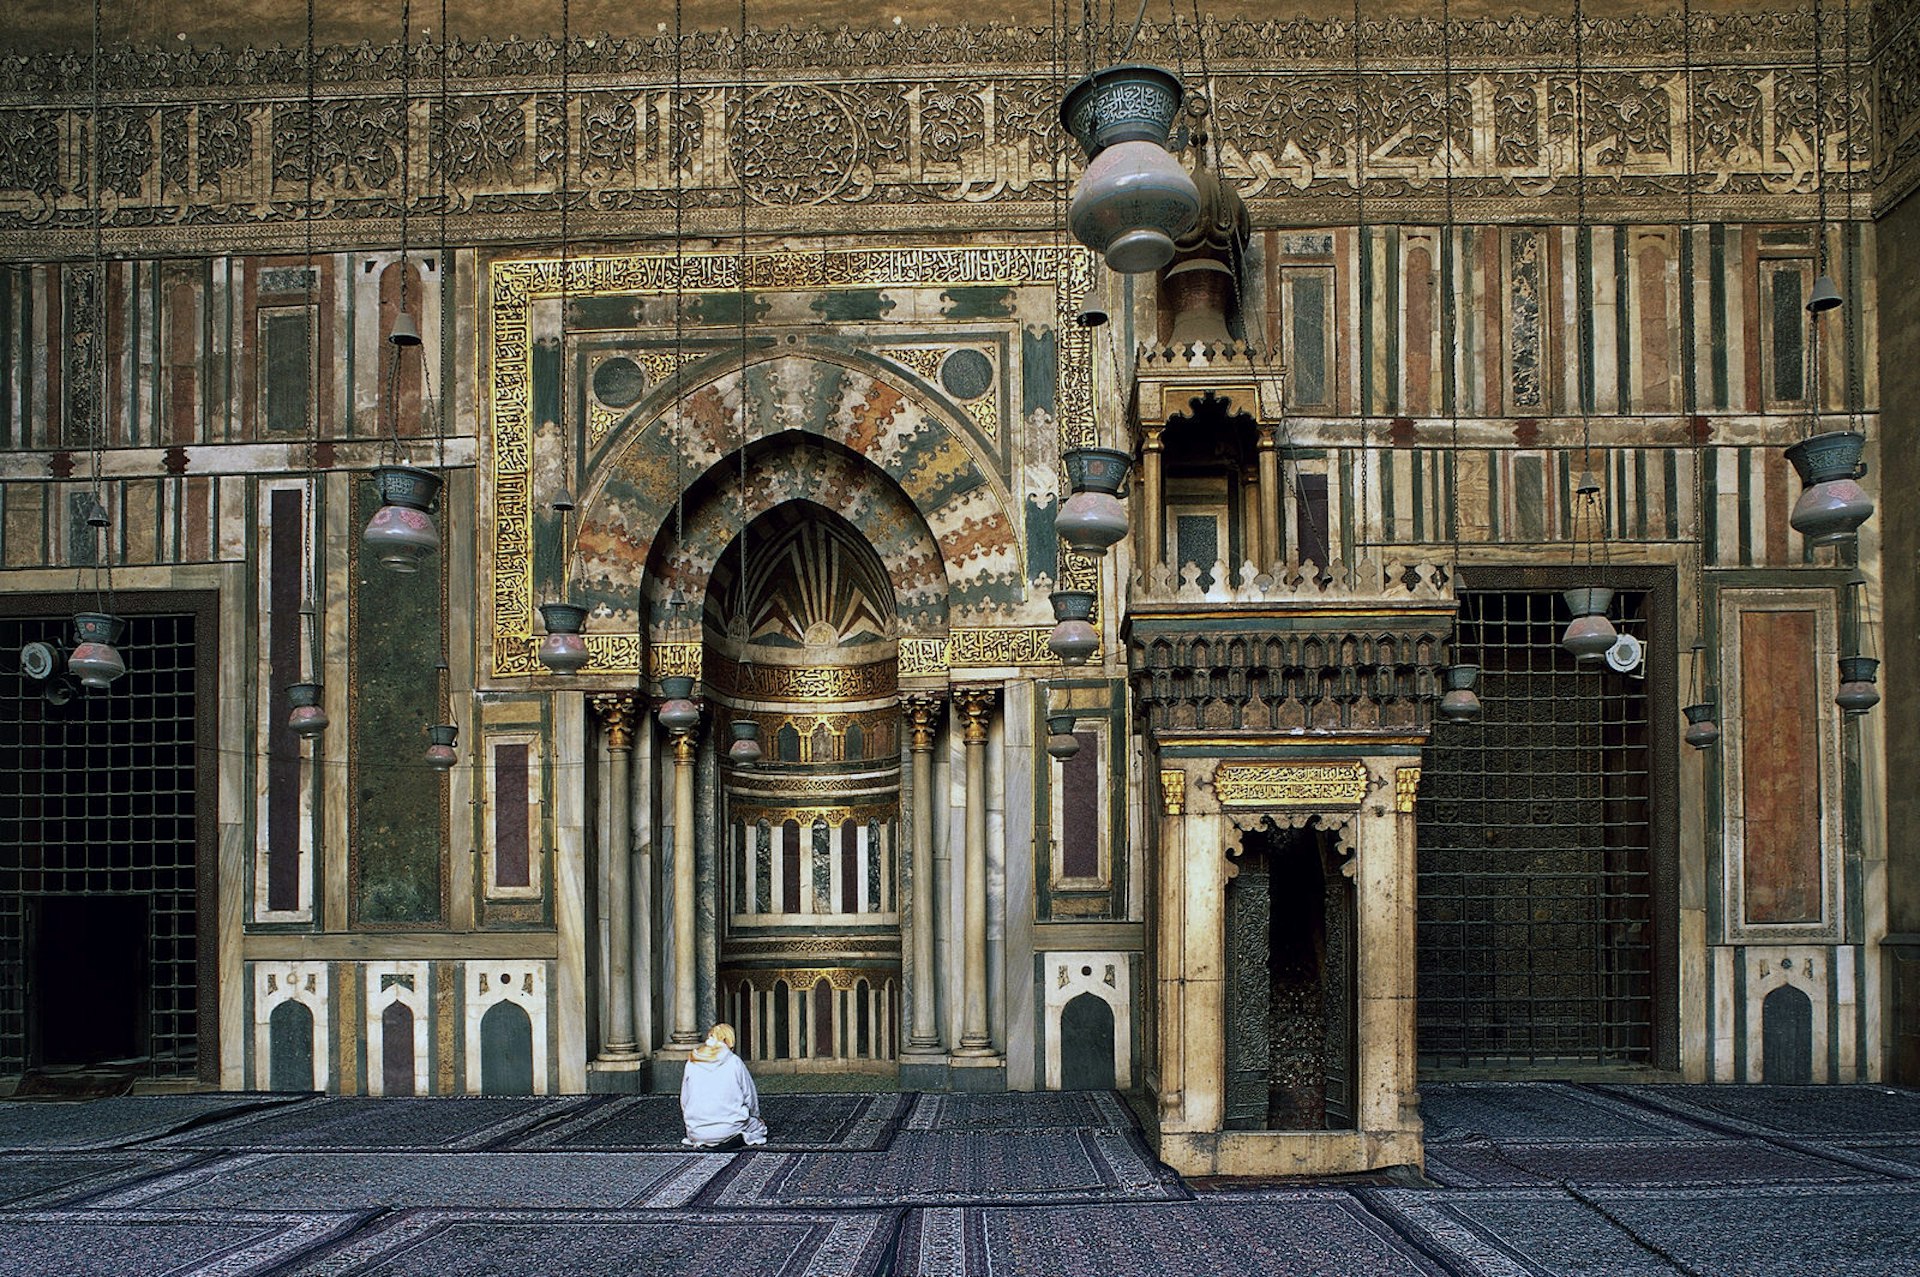 The 14th-century mihrab and minbar in the prayer hall of the Mosque-Madrassa of Sultan Hassan, Cairo, Egypt. Image by De Agostini / S. Vannini / Getty Images